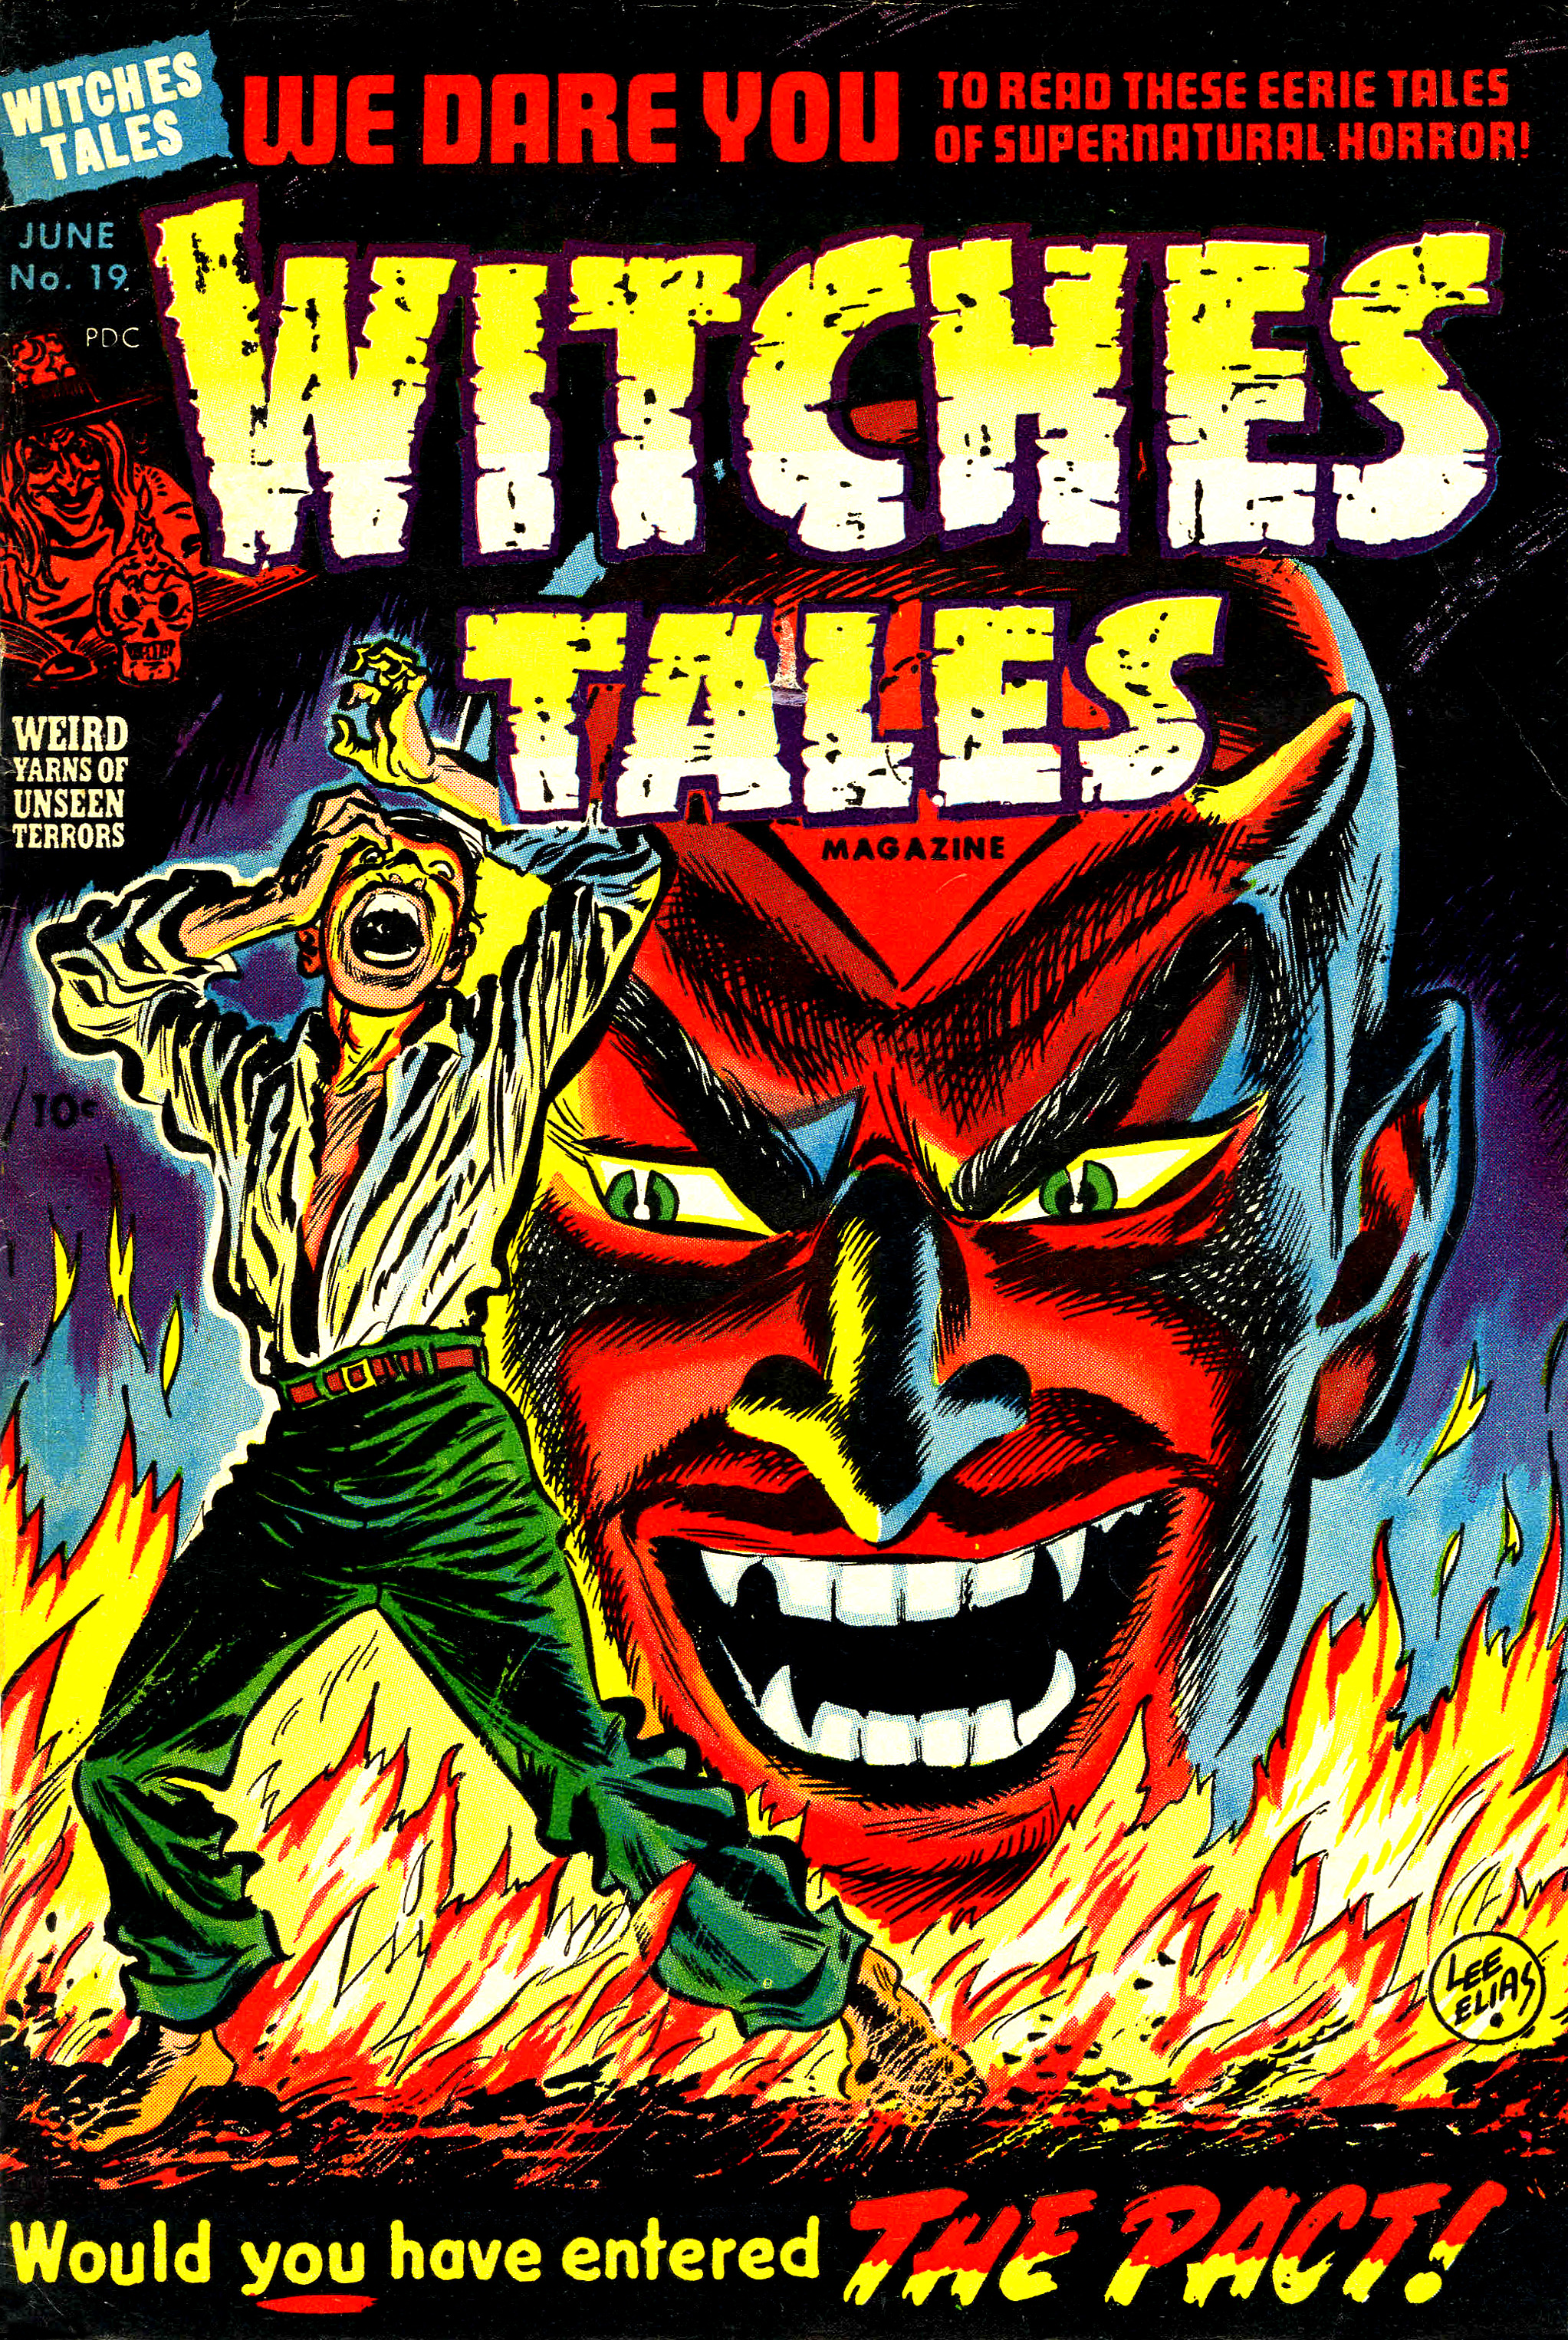 Witches Tales #19, Lee Elias Cover (Harvey, 1953)